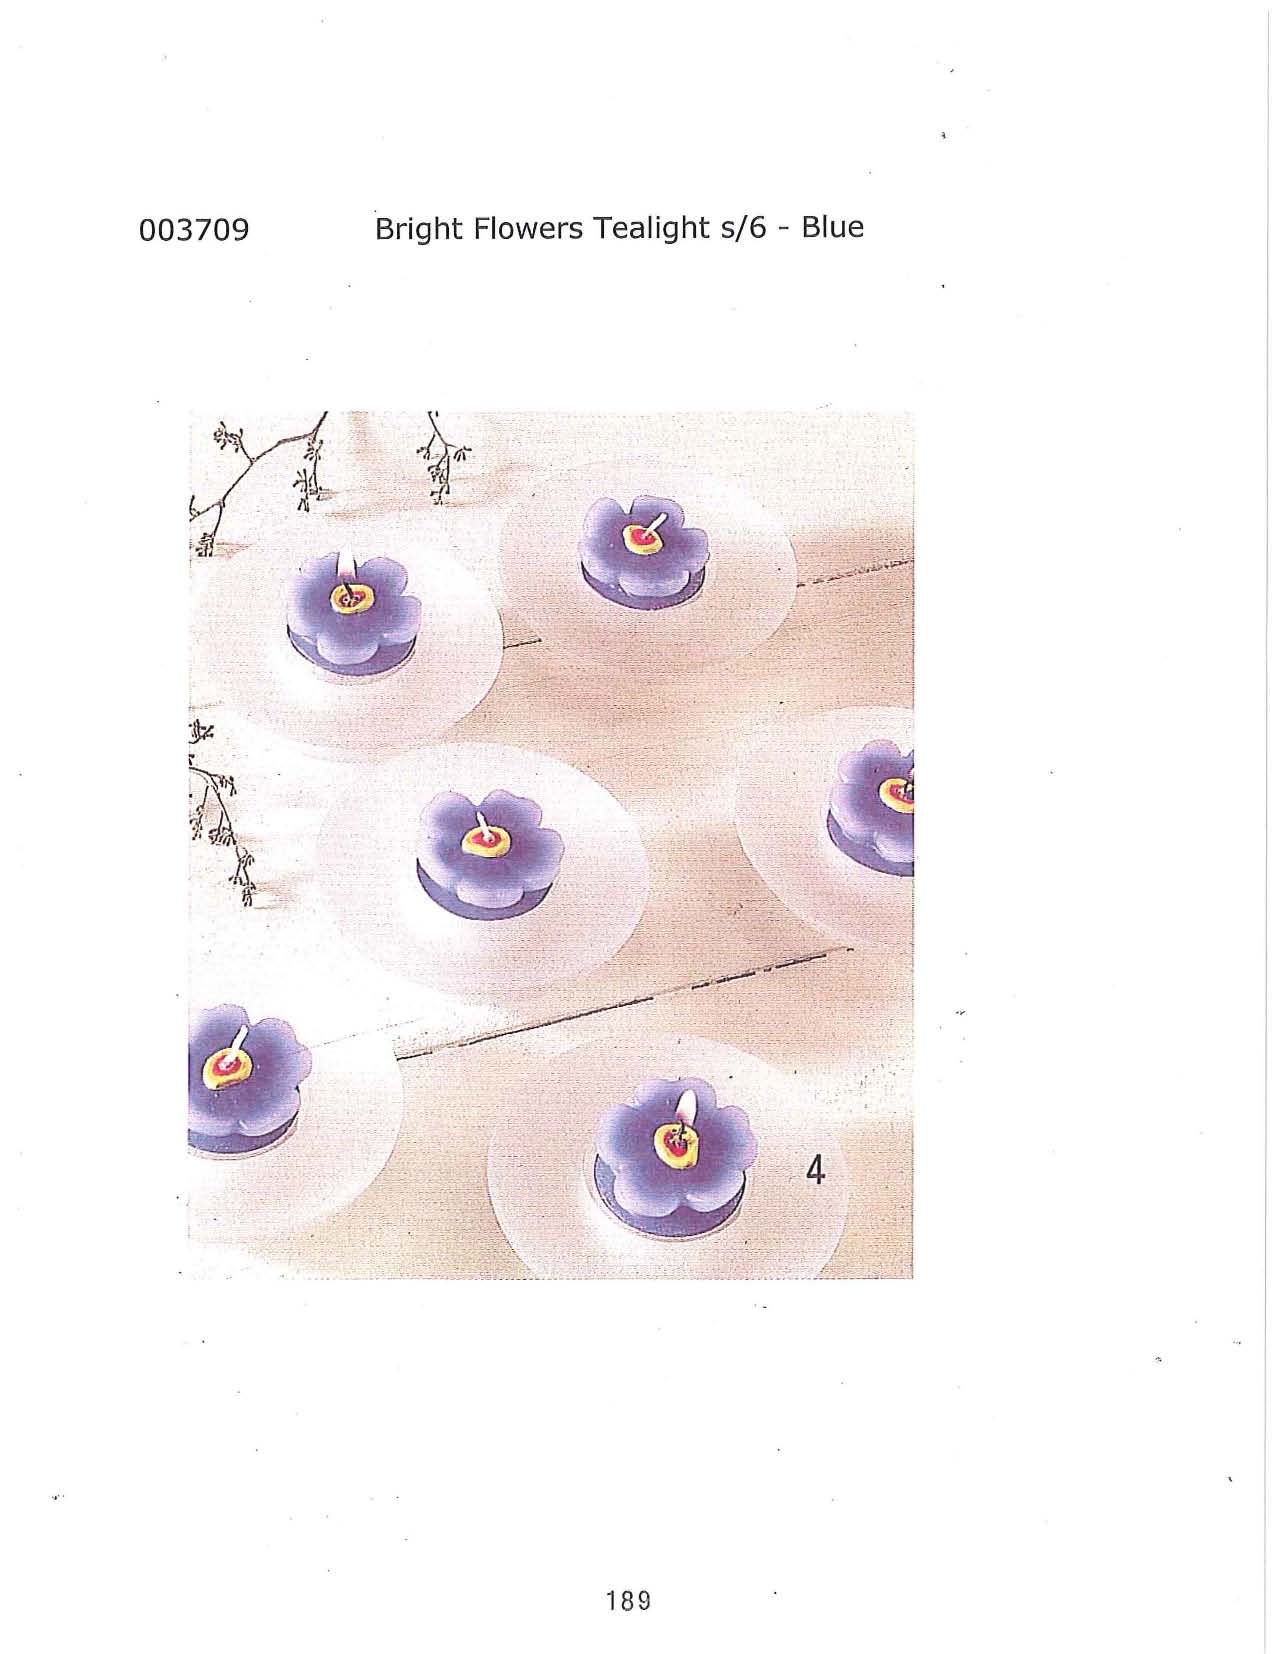 Bright Flowers Tealight Candle s/6 - Blue